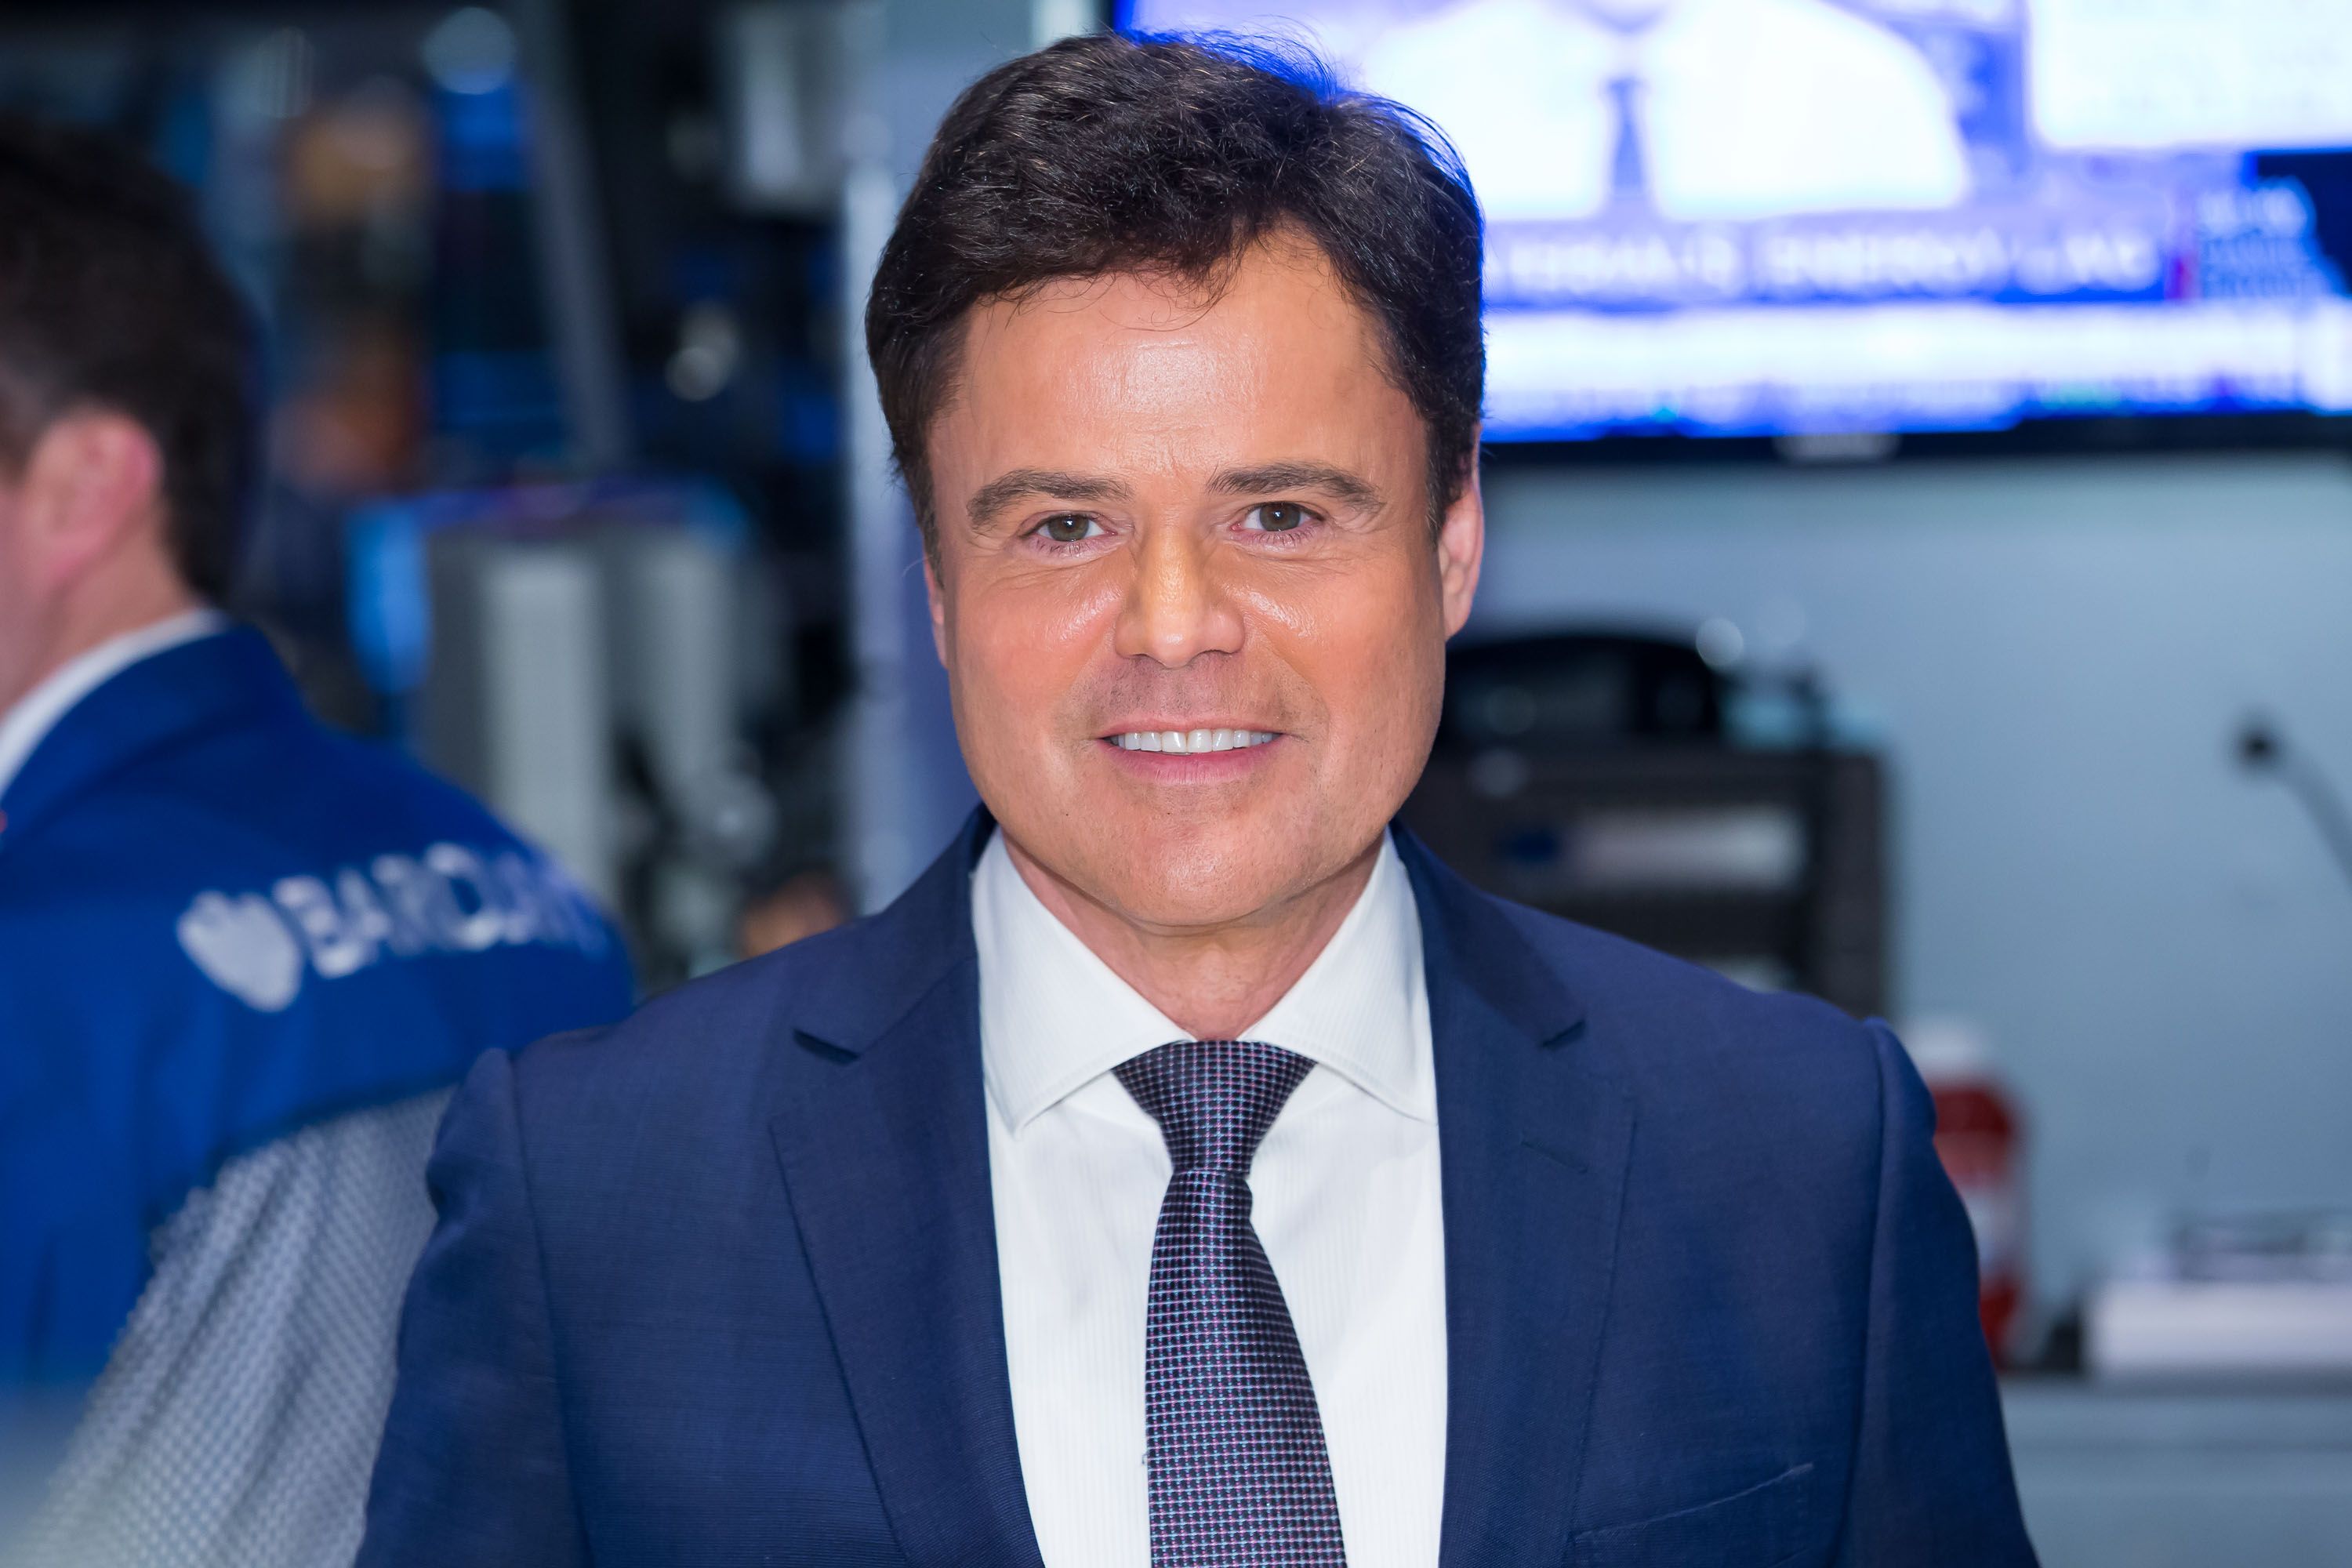 Donny Osmond rings the Closing Bell at New York Stock Exchange on January 13, 2015, in New York City | Photo: Ben Hider/Getty Images